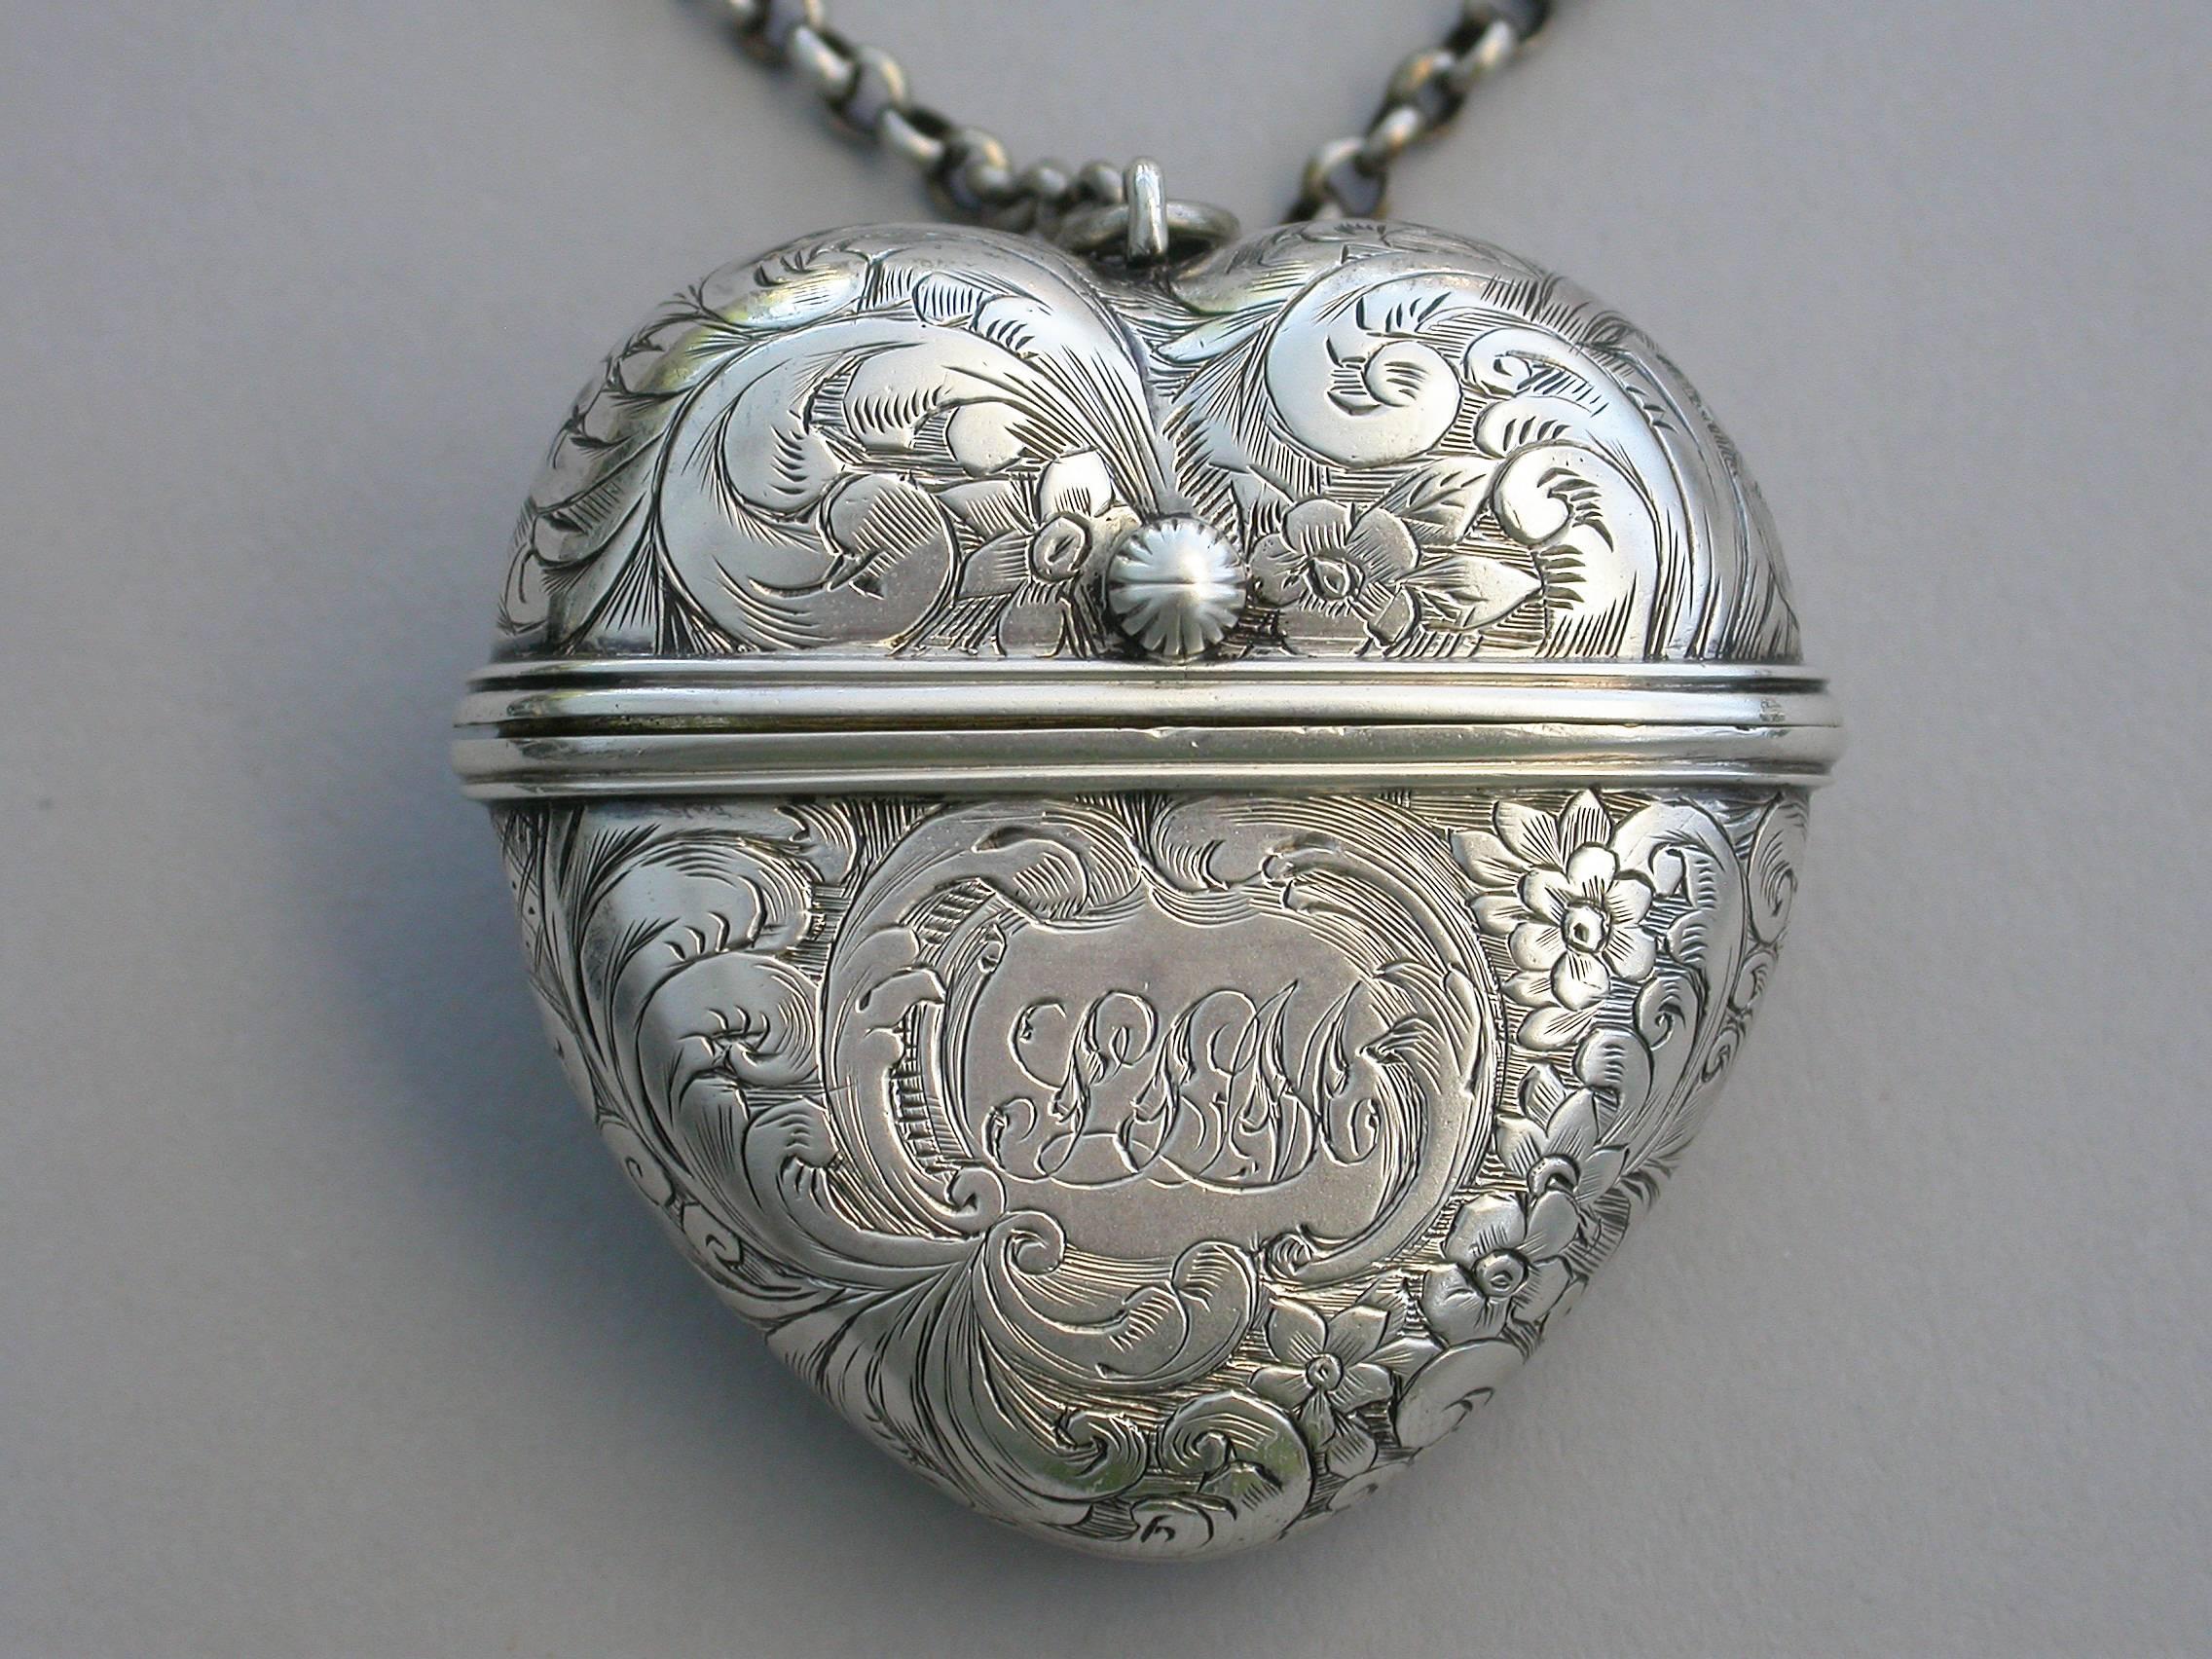 A rare Victorian silver Vinaigrette made in the form of a heart, with attached suspension ring and chain, the body all-over engraved with scrolling leaves and flowers, the design repeated on the internal pierced silver gilt grille. A shaped